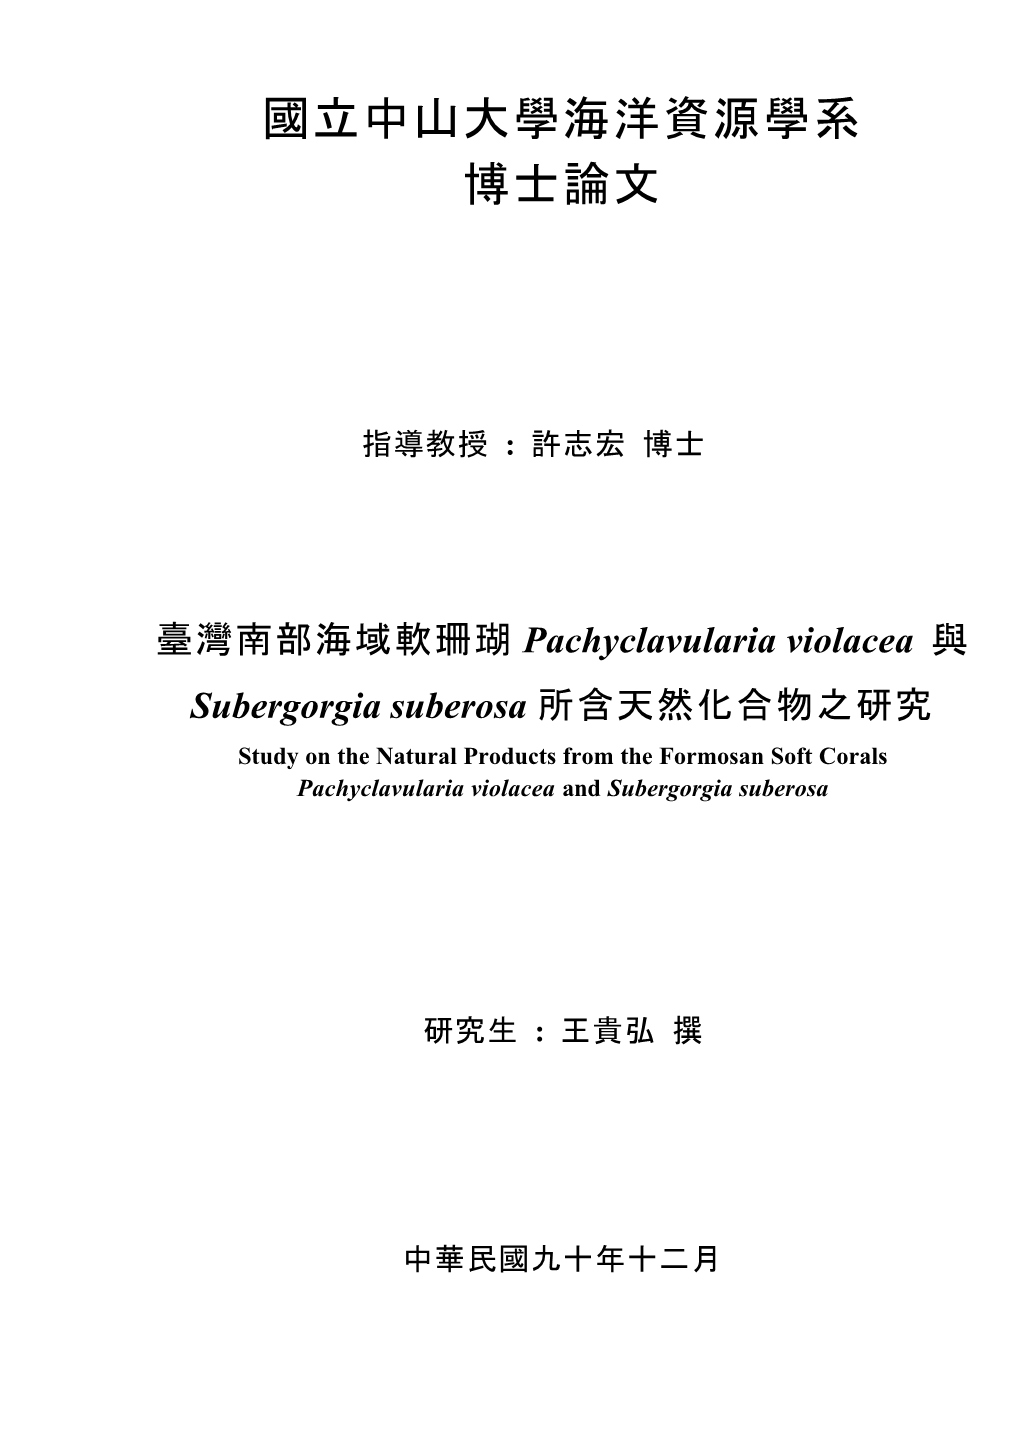 S 法tudy on the Natural Products from the Formosan Soft Corals Pachyclavularia Violacea and Subergorgia Suberosa